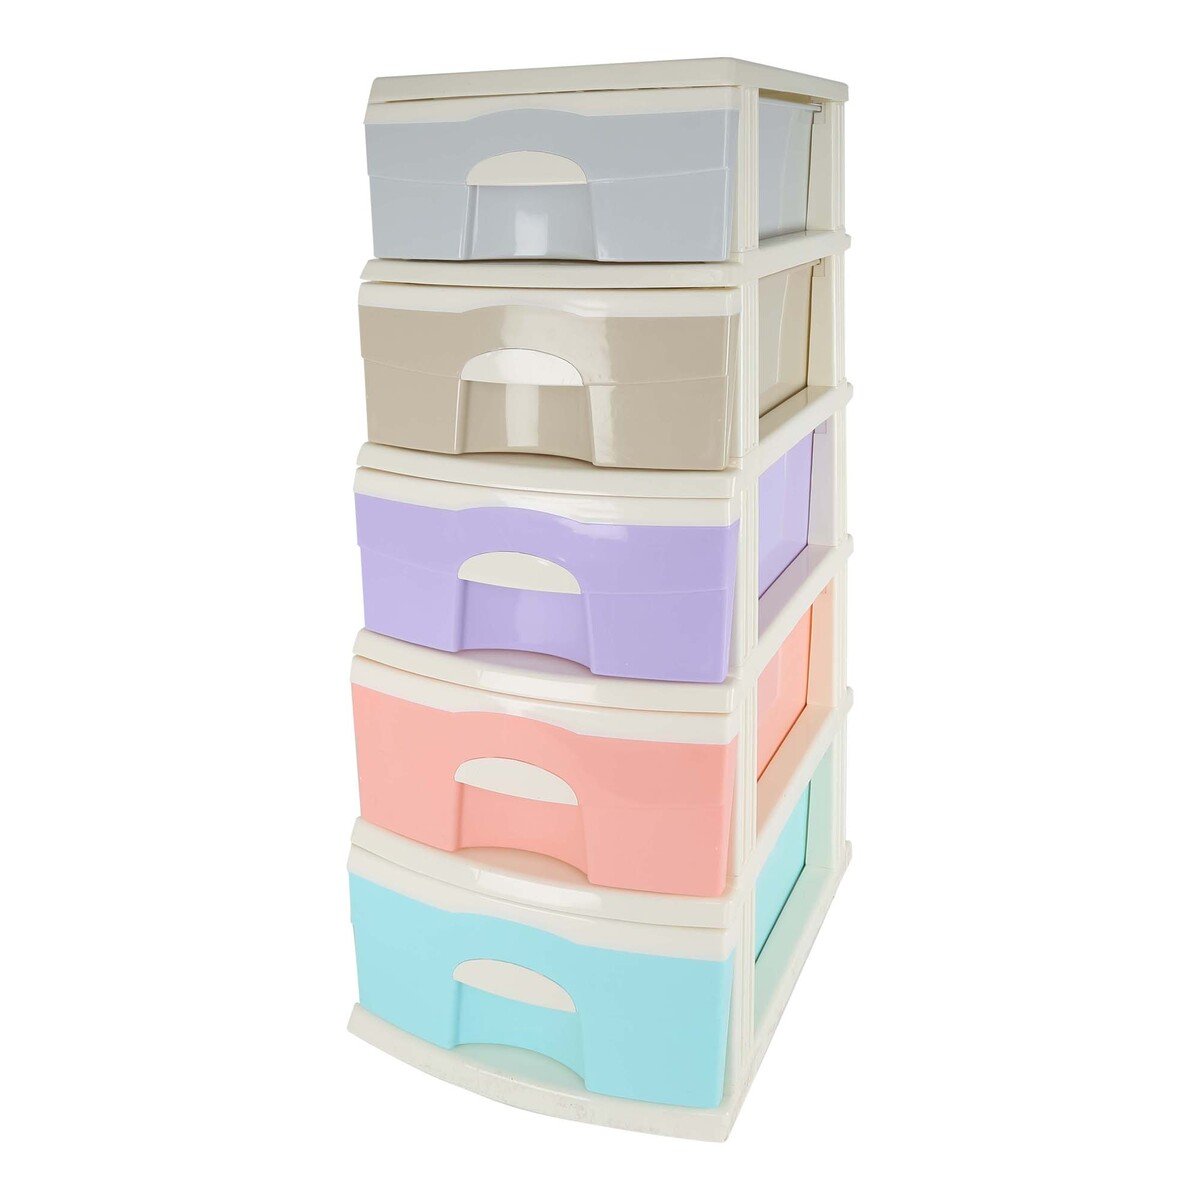 Home Plastic Drawer 5Layer 7715 Assorted Colors